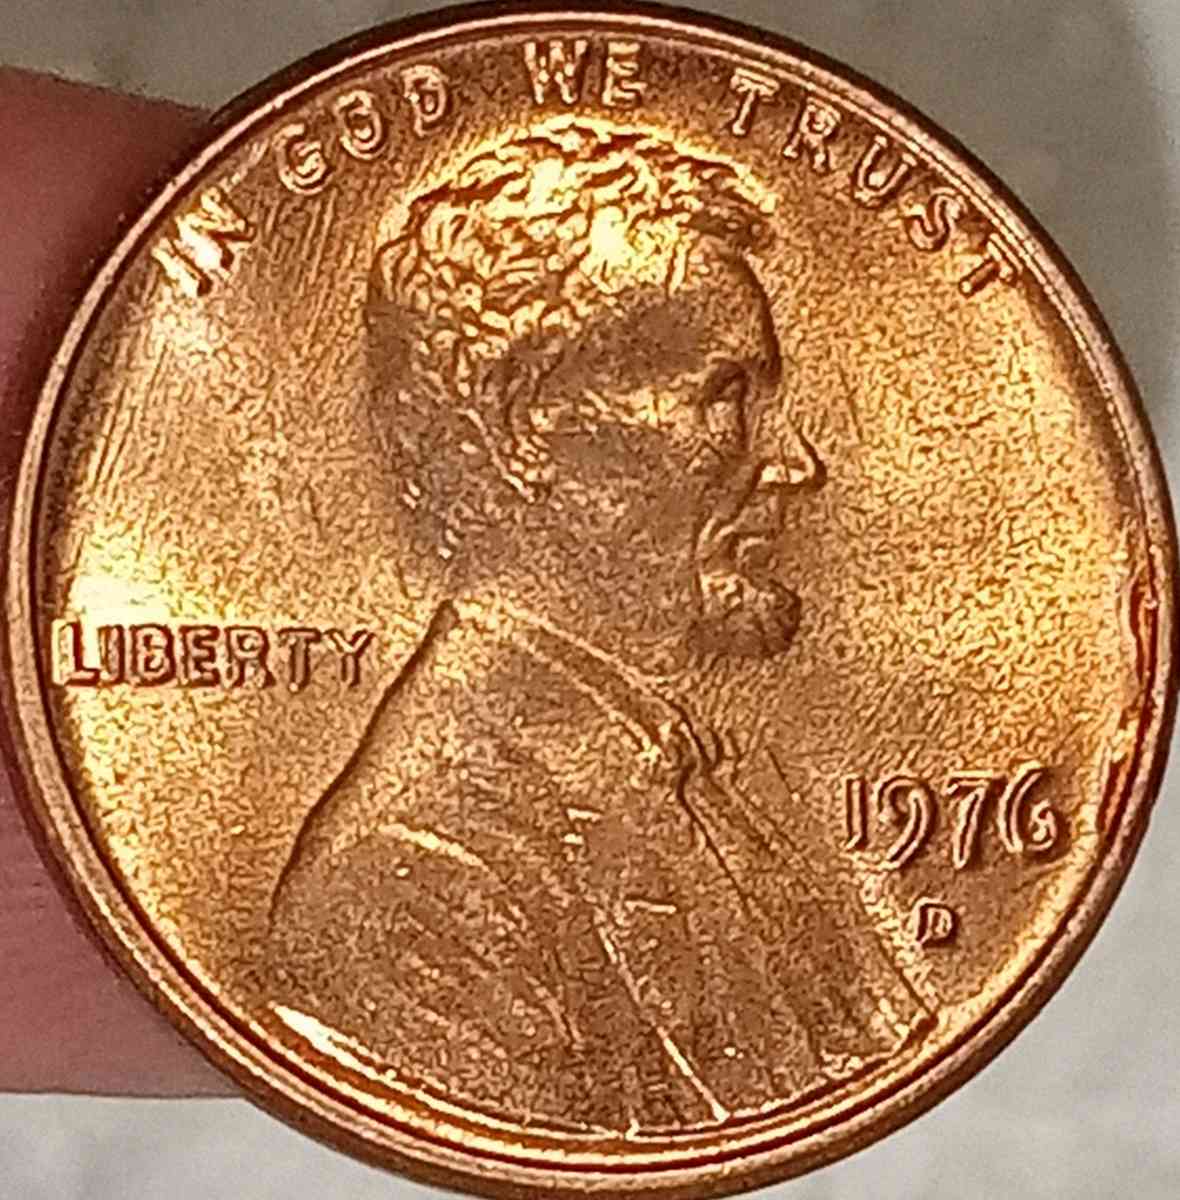 USA COINS LINCOLN CENT 1976 D WITH DOUBLED DIE UNIQUE COIN